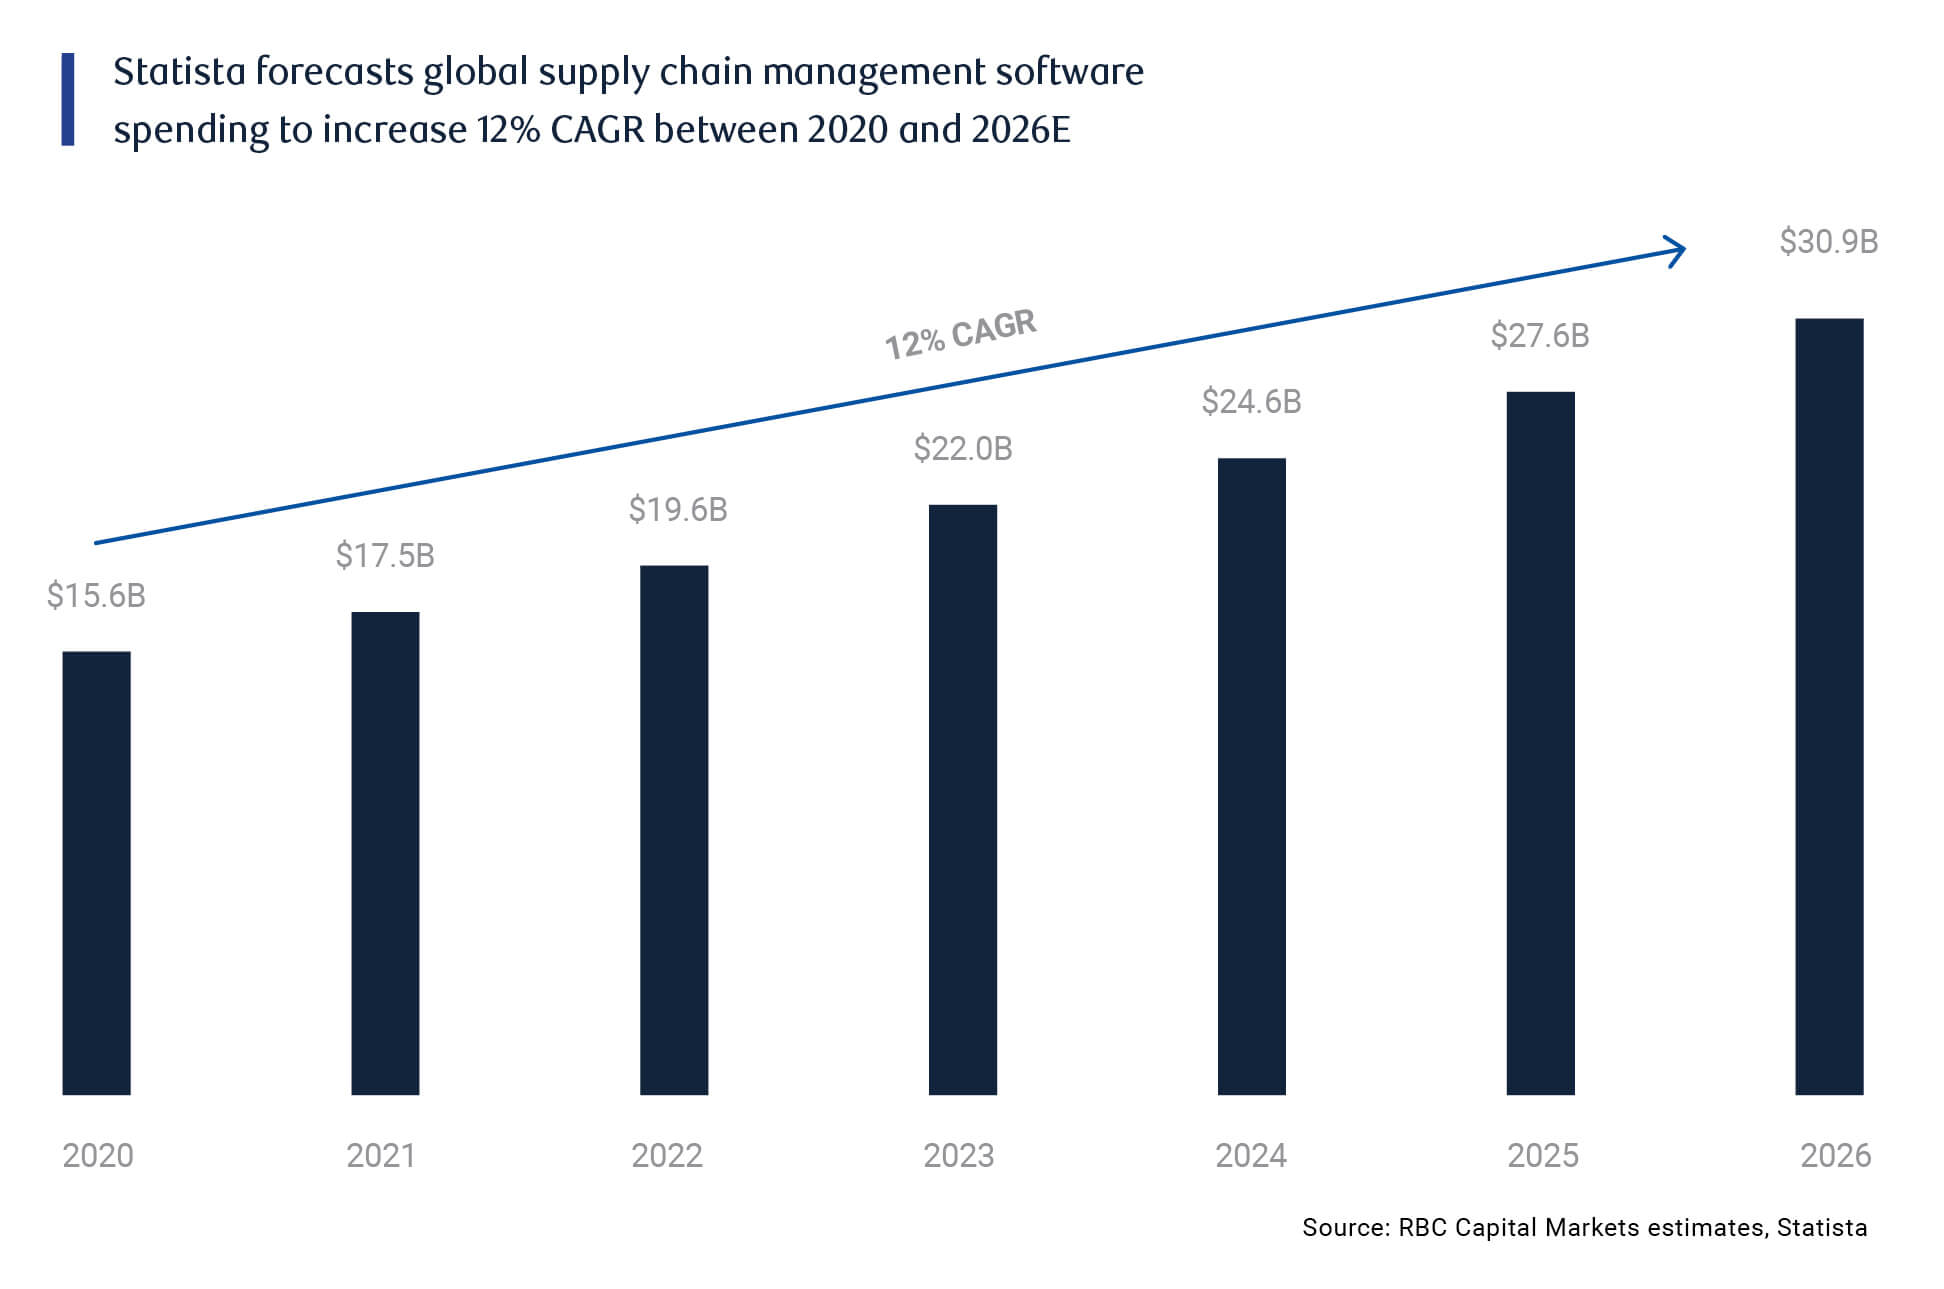 Chart: Statista forecasts global supply chain management software spending to increase 12% CAGR between 2020 and 2026E